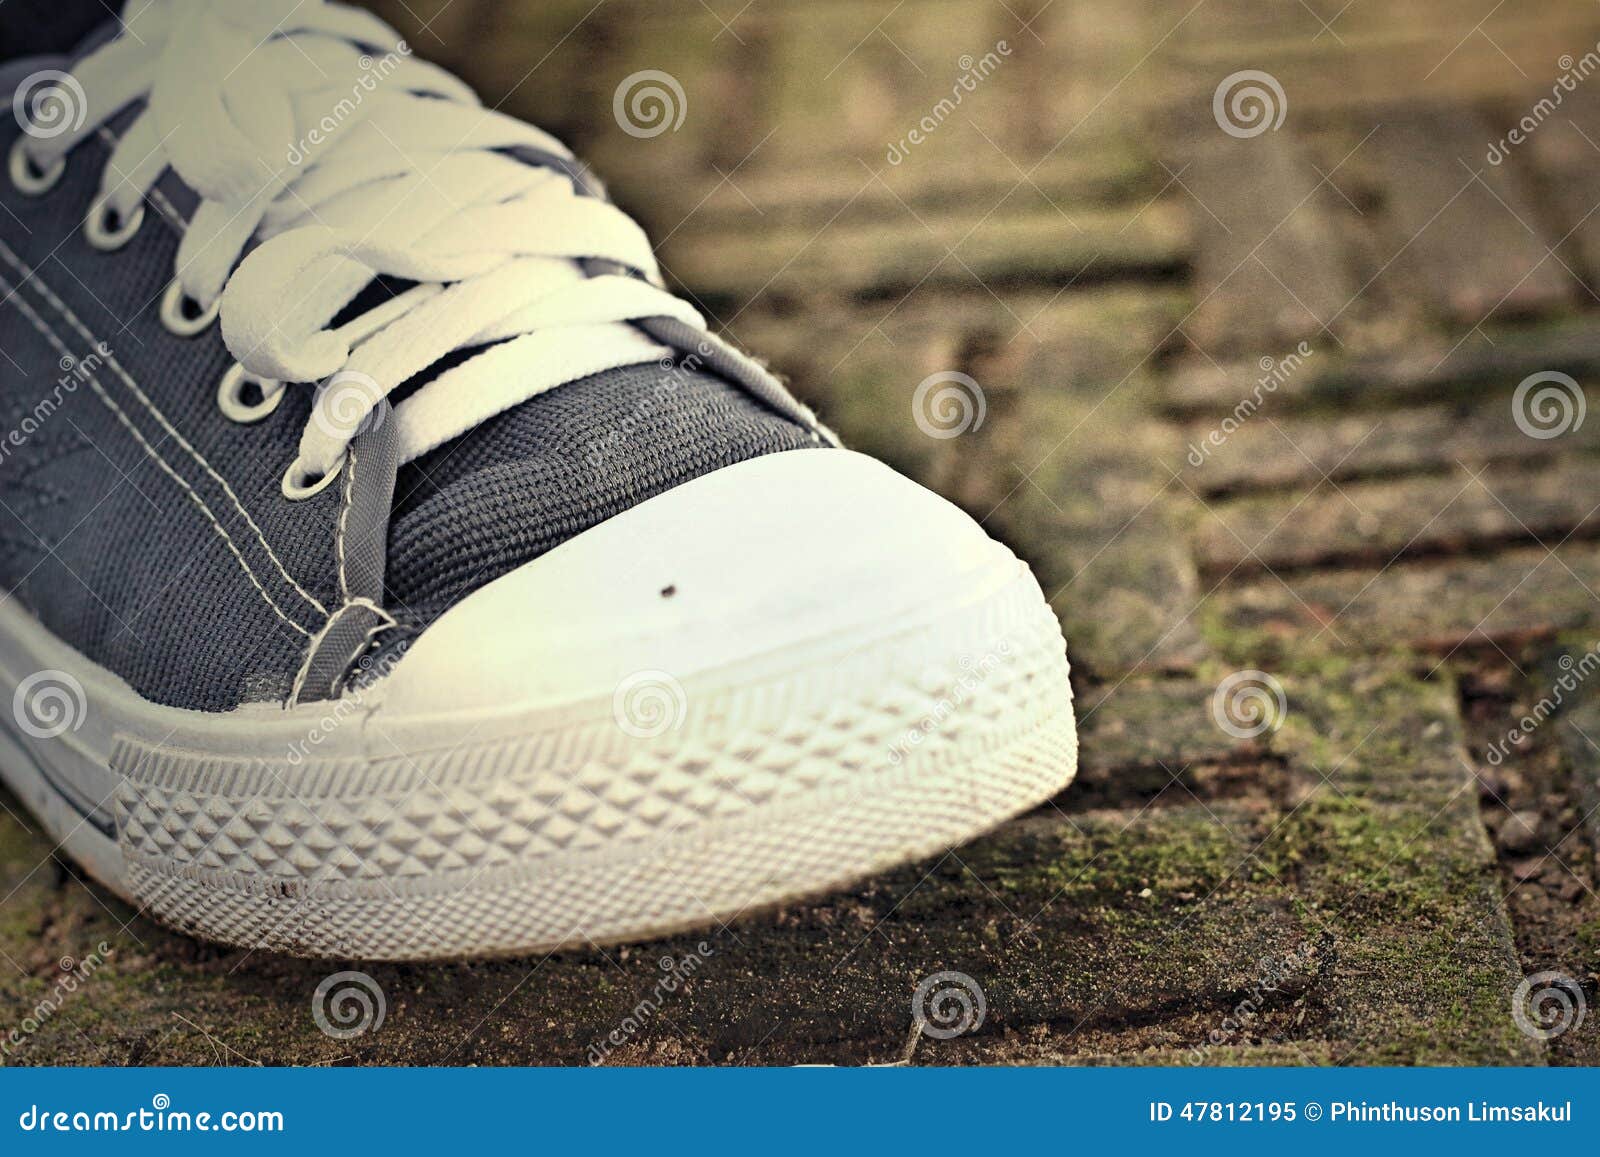 Gray Sneakers - Accessories and Wearable (Sneakers). Stock Image ...